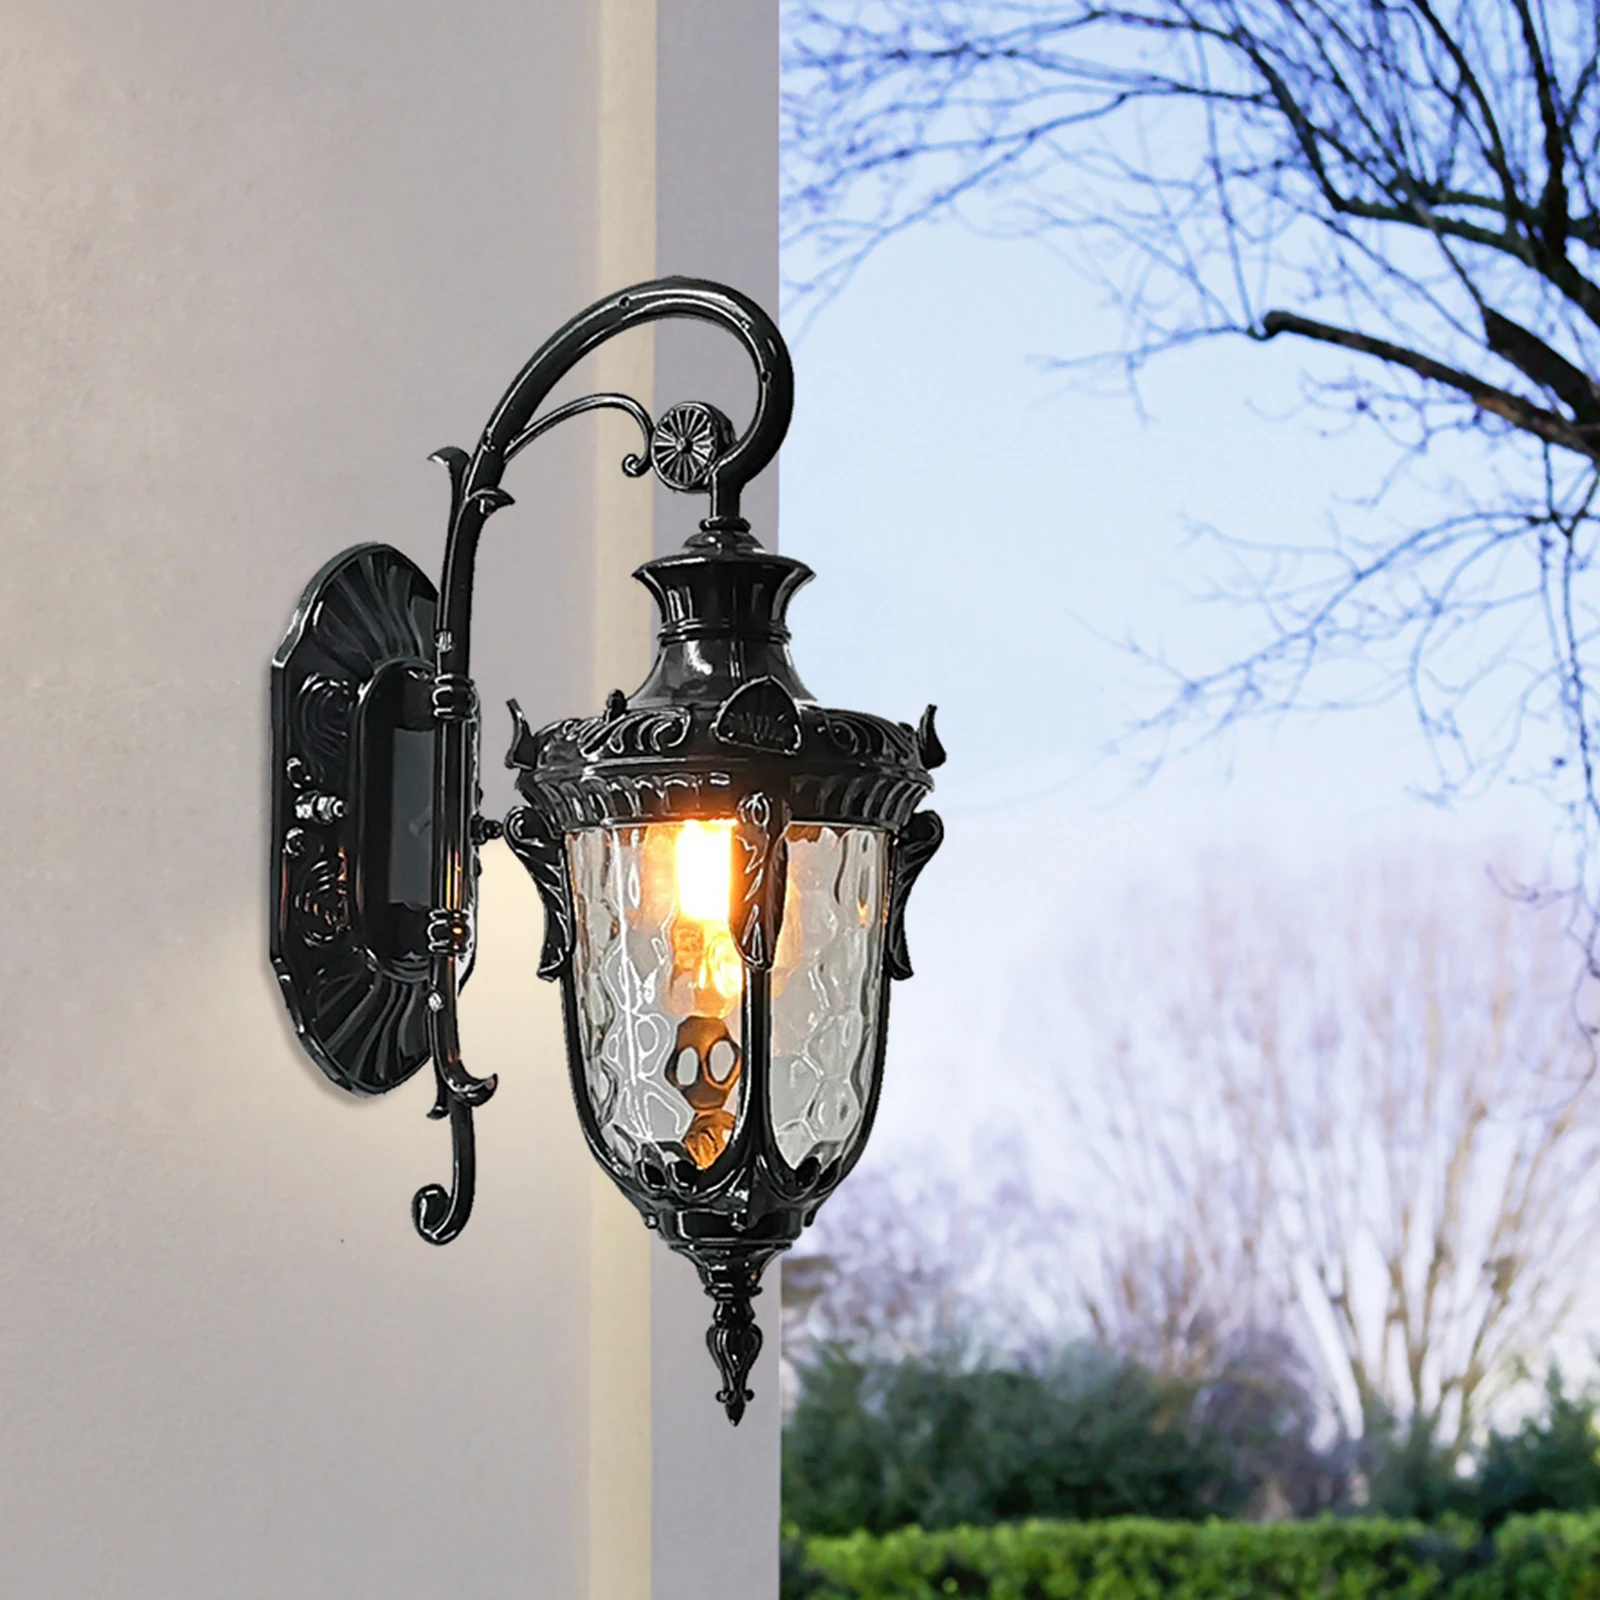 

Black/Bronze Outdoor Wall Mount Waterproof Wall Light with Hammered Glass Shade for Porch Patio